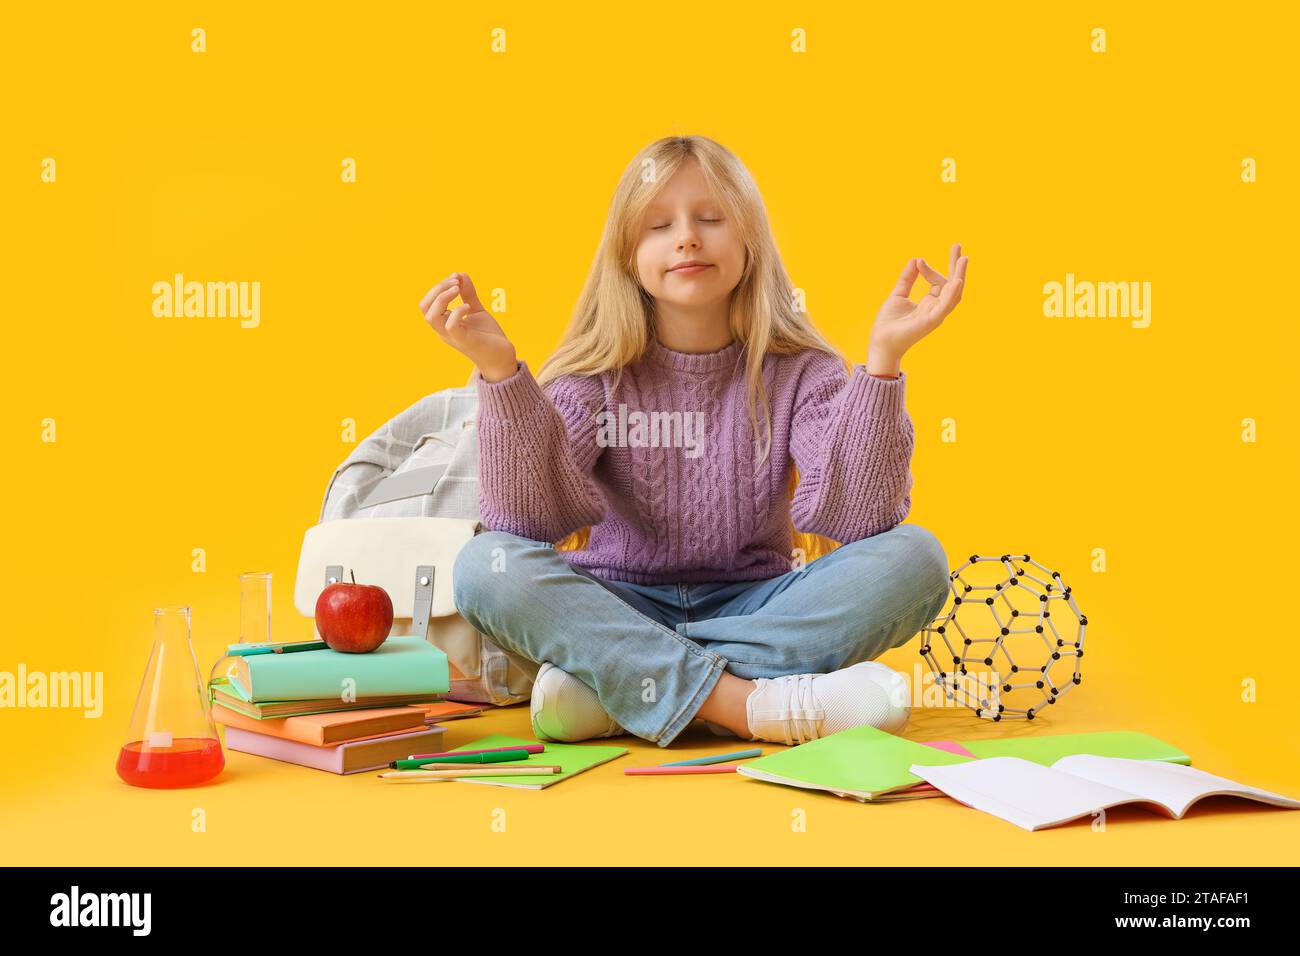 Little schoolgirl with backpack and copybooks meditating on yellow background Stock Photo